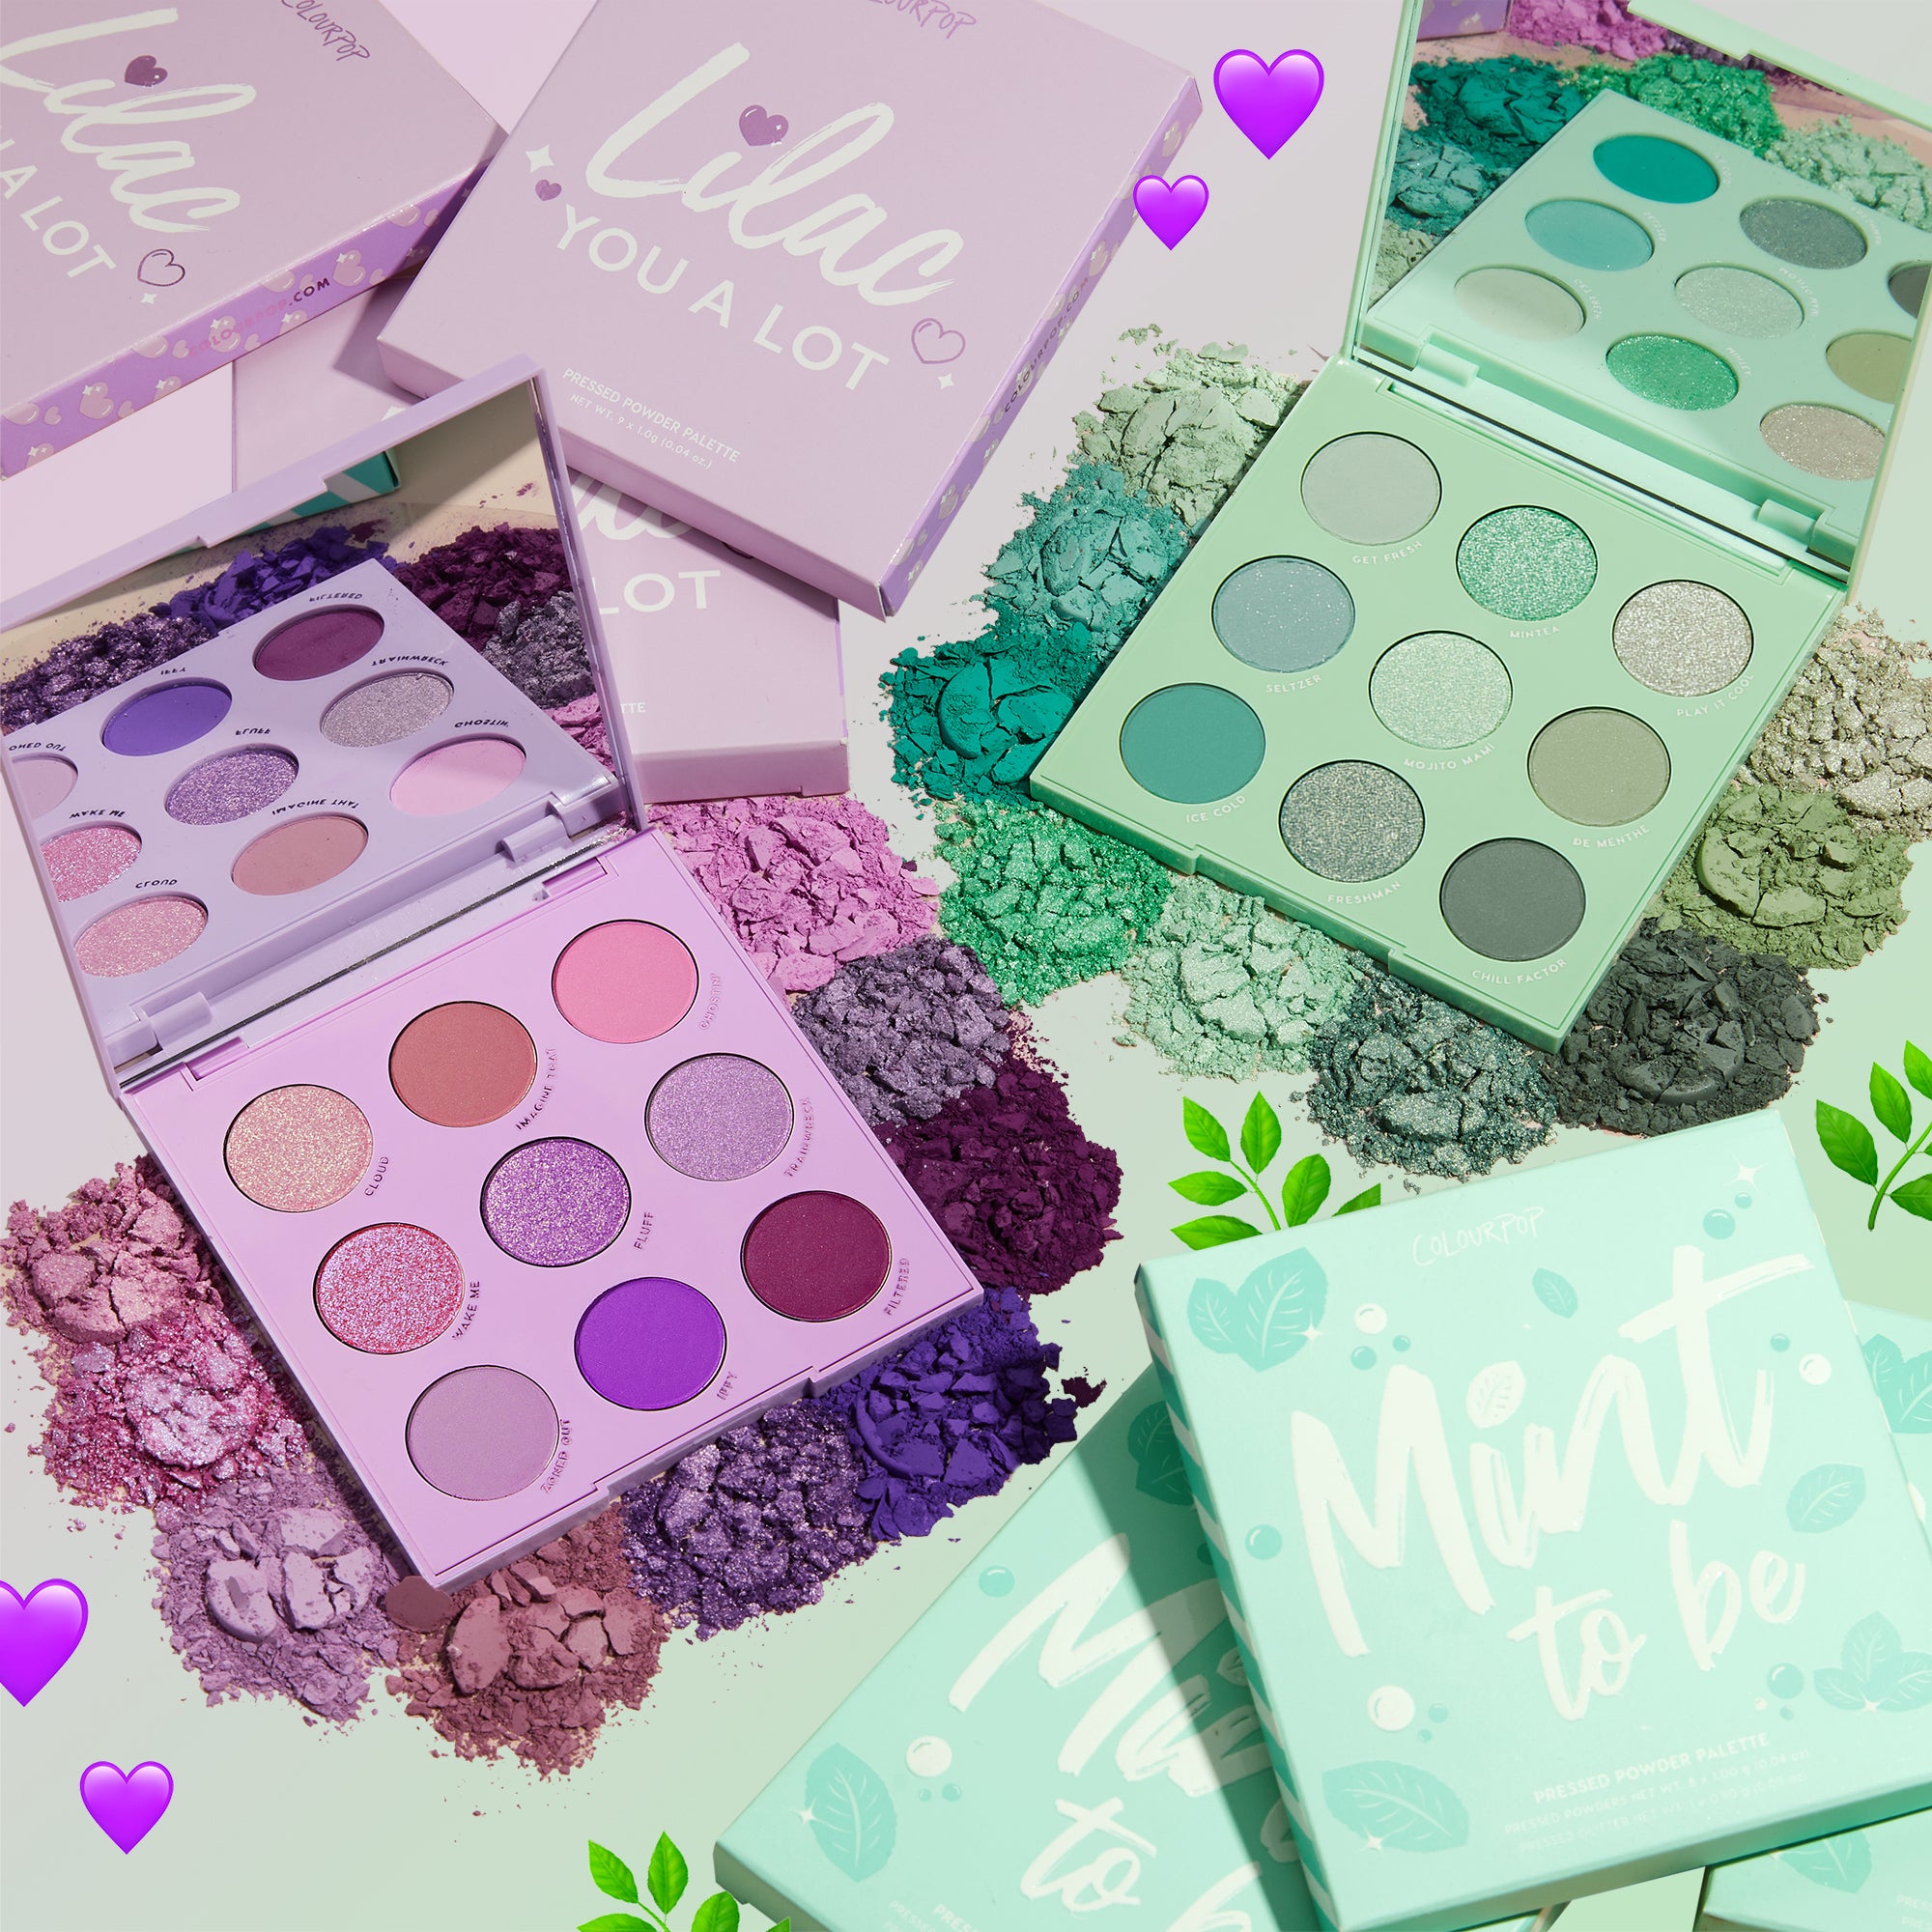 Lilac Mojito Eyeshadow Bundle includes Lilac you a lot which has purple shades and Mint to be palette which has army green shades 